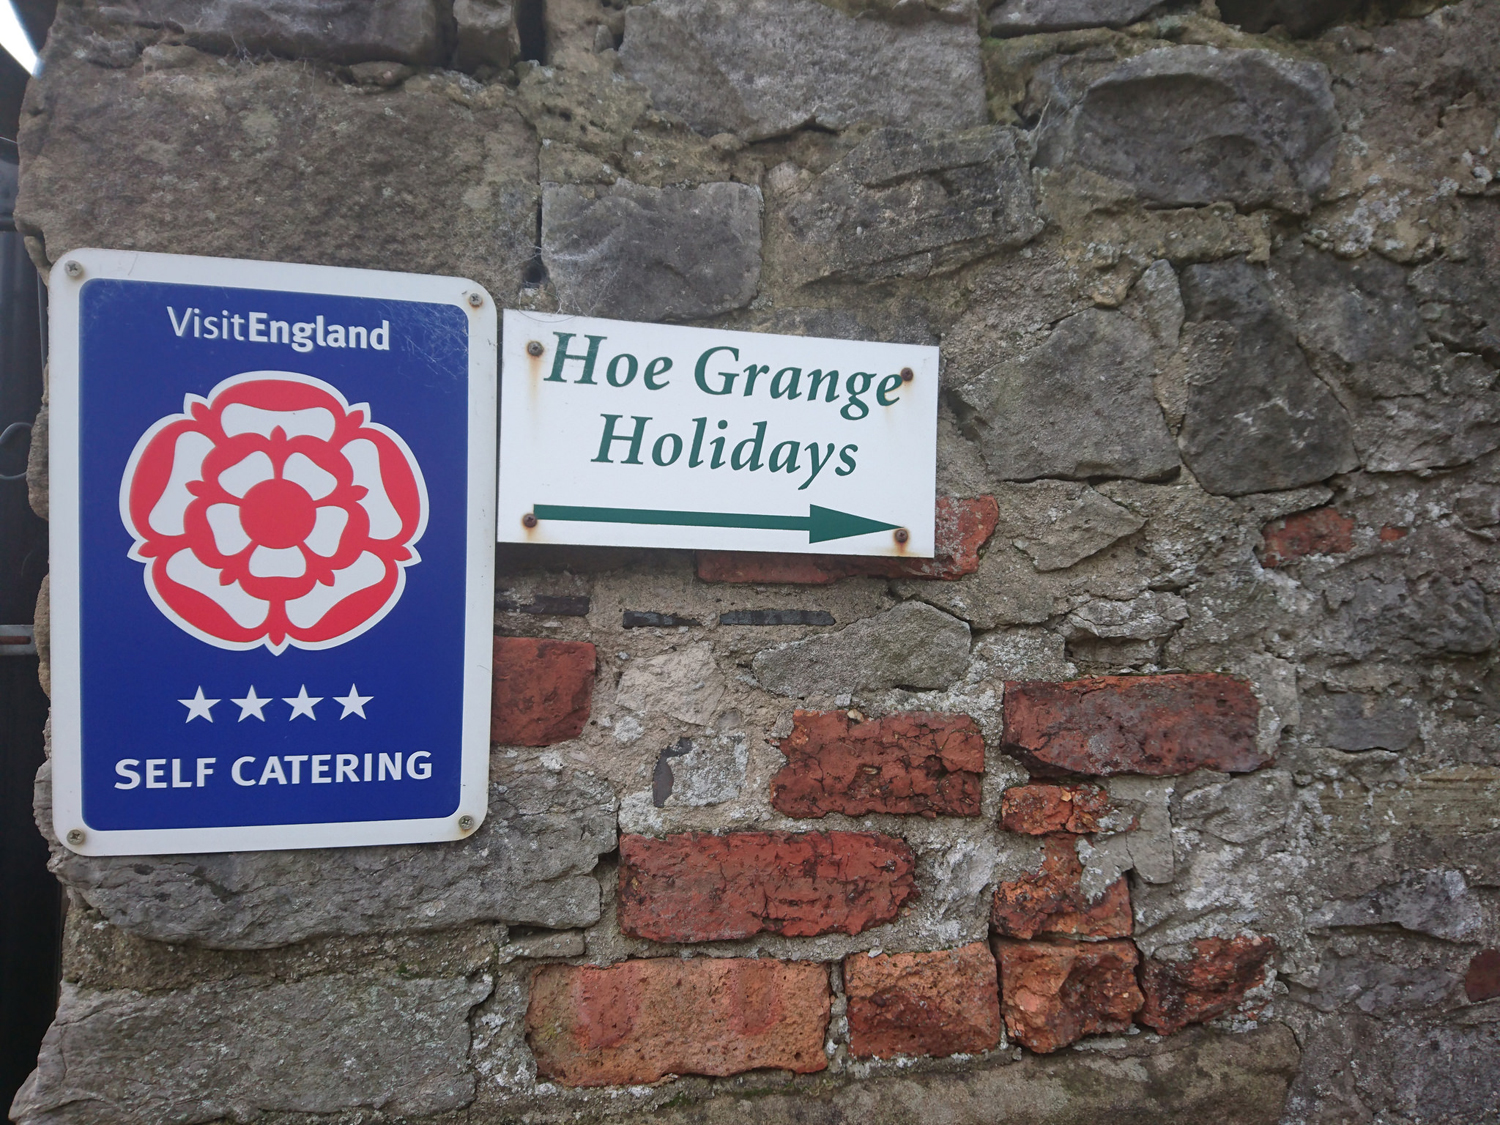 Welcome to Hoe Grange Holidays